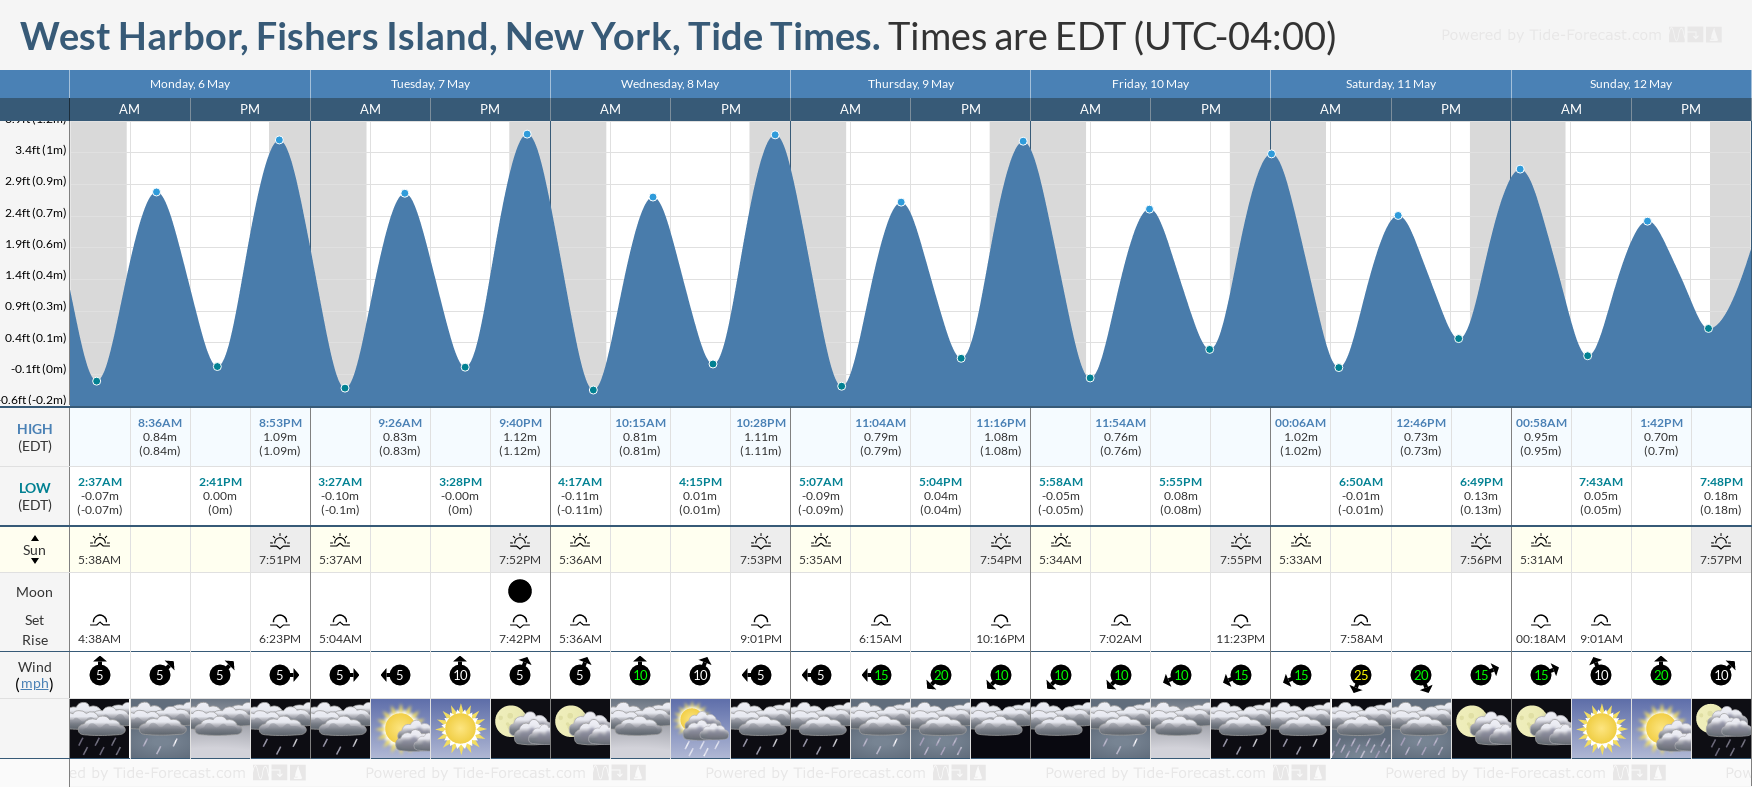 West Harbor, Fishers Island, New York Tide Chart including high and low tide tide times for the next 7 days